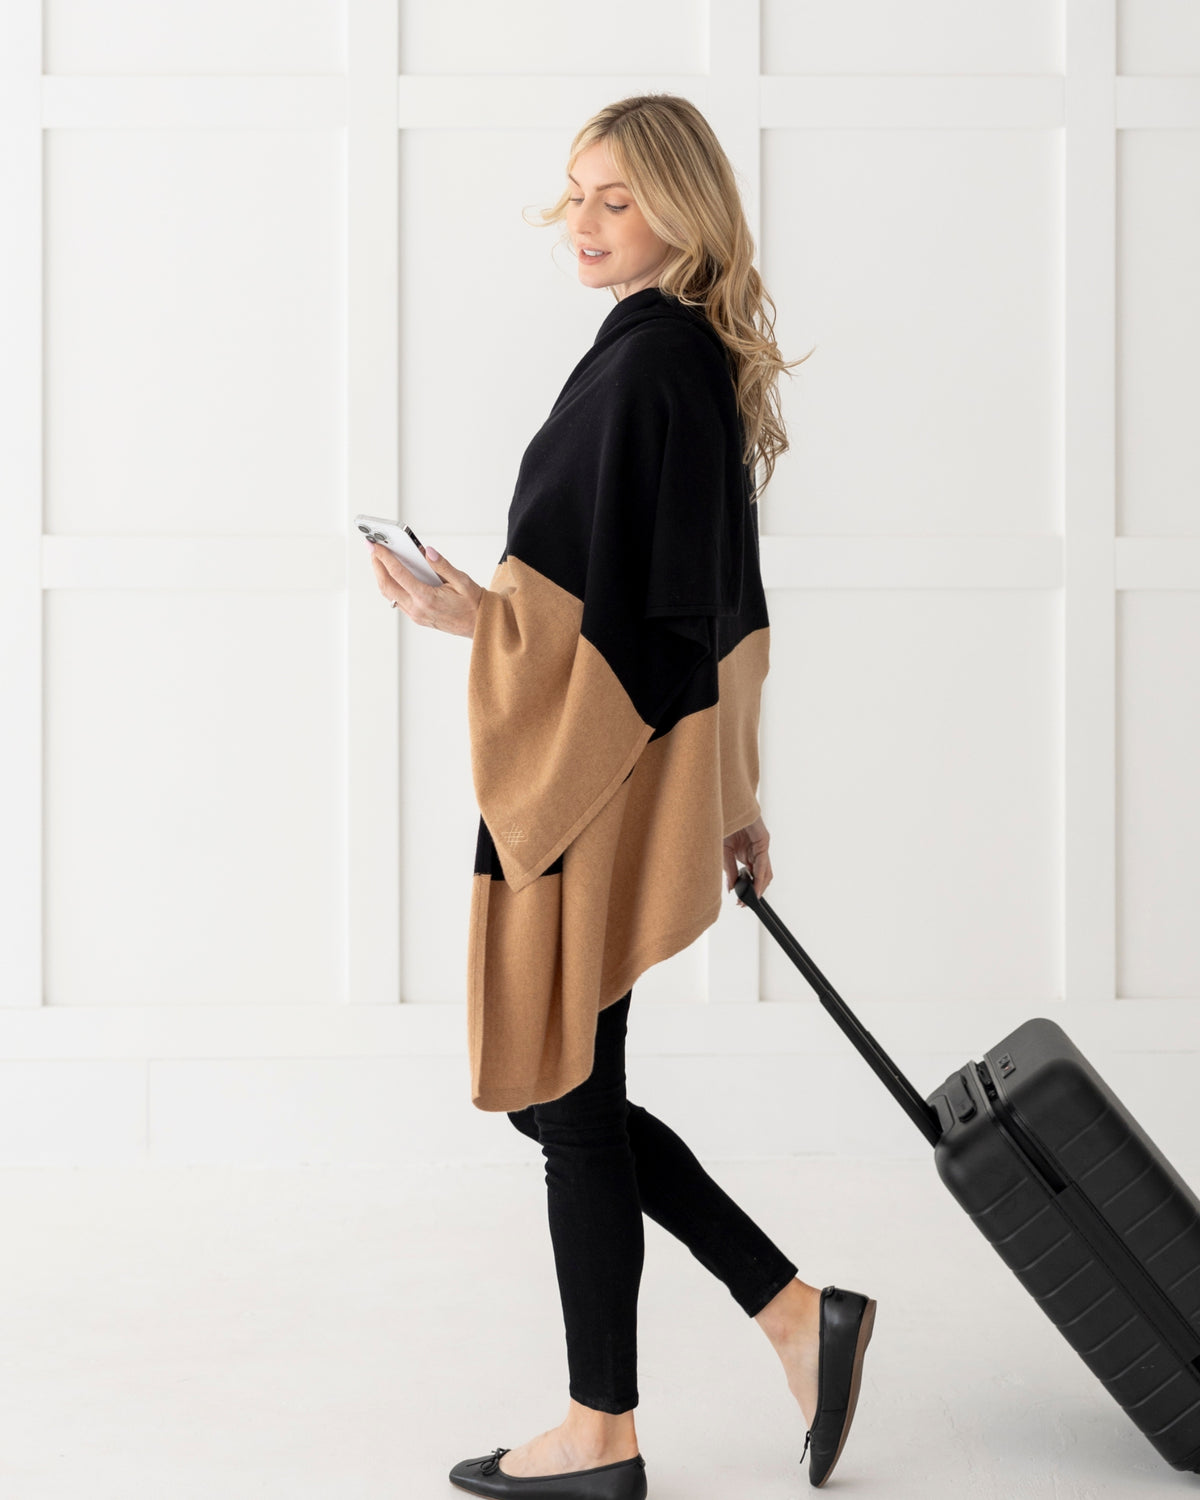 Cashmere Cotton Luxe Travel Scarf - Black and Camel Colorblock